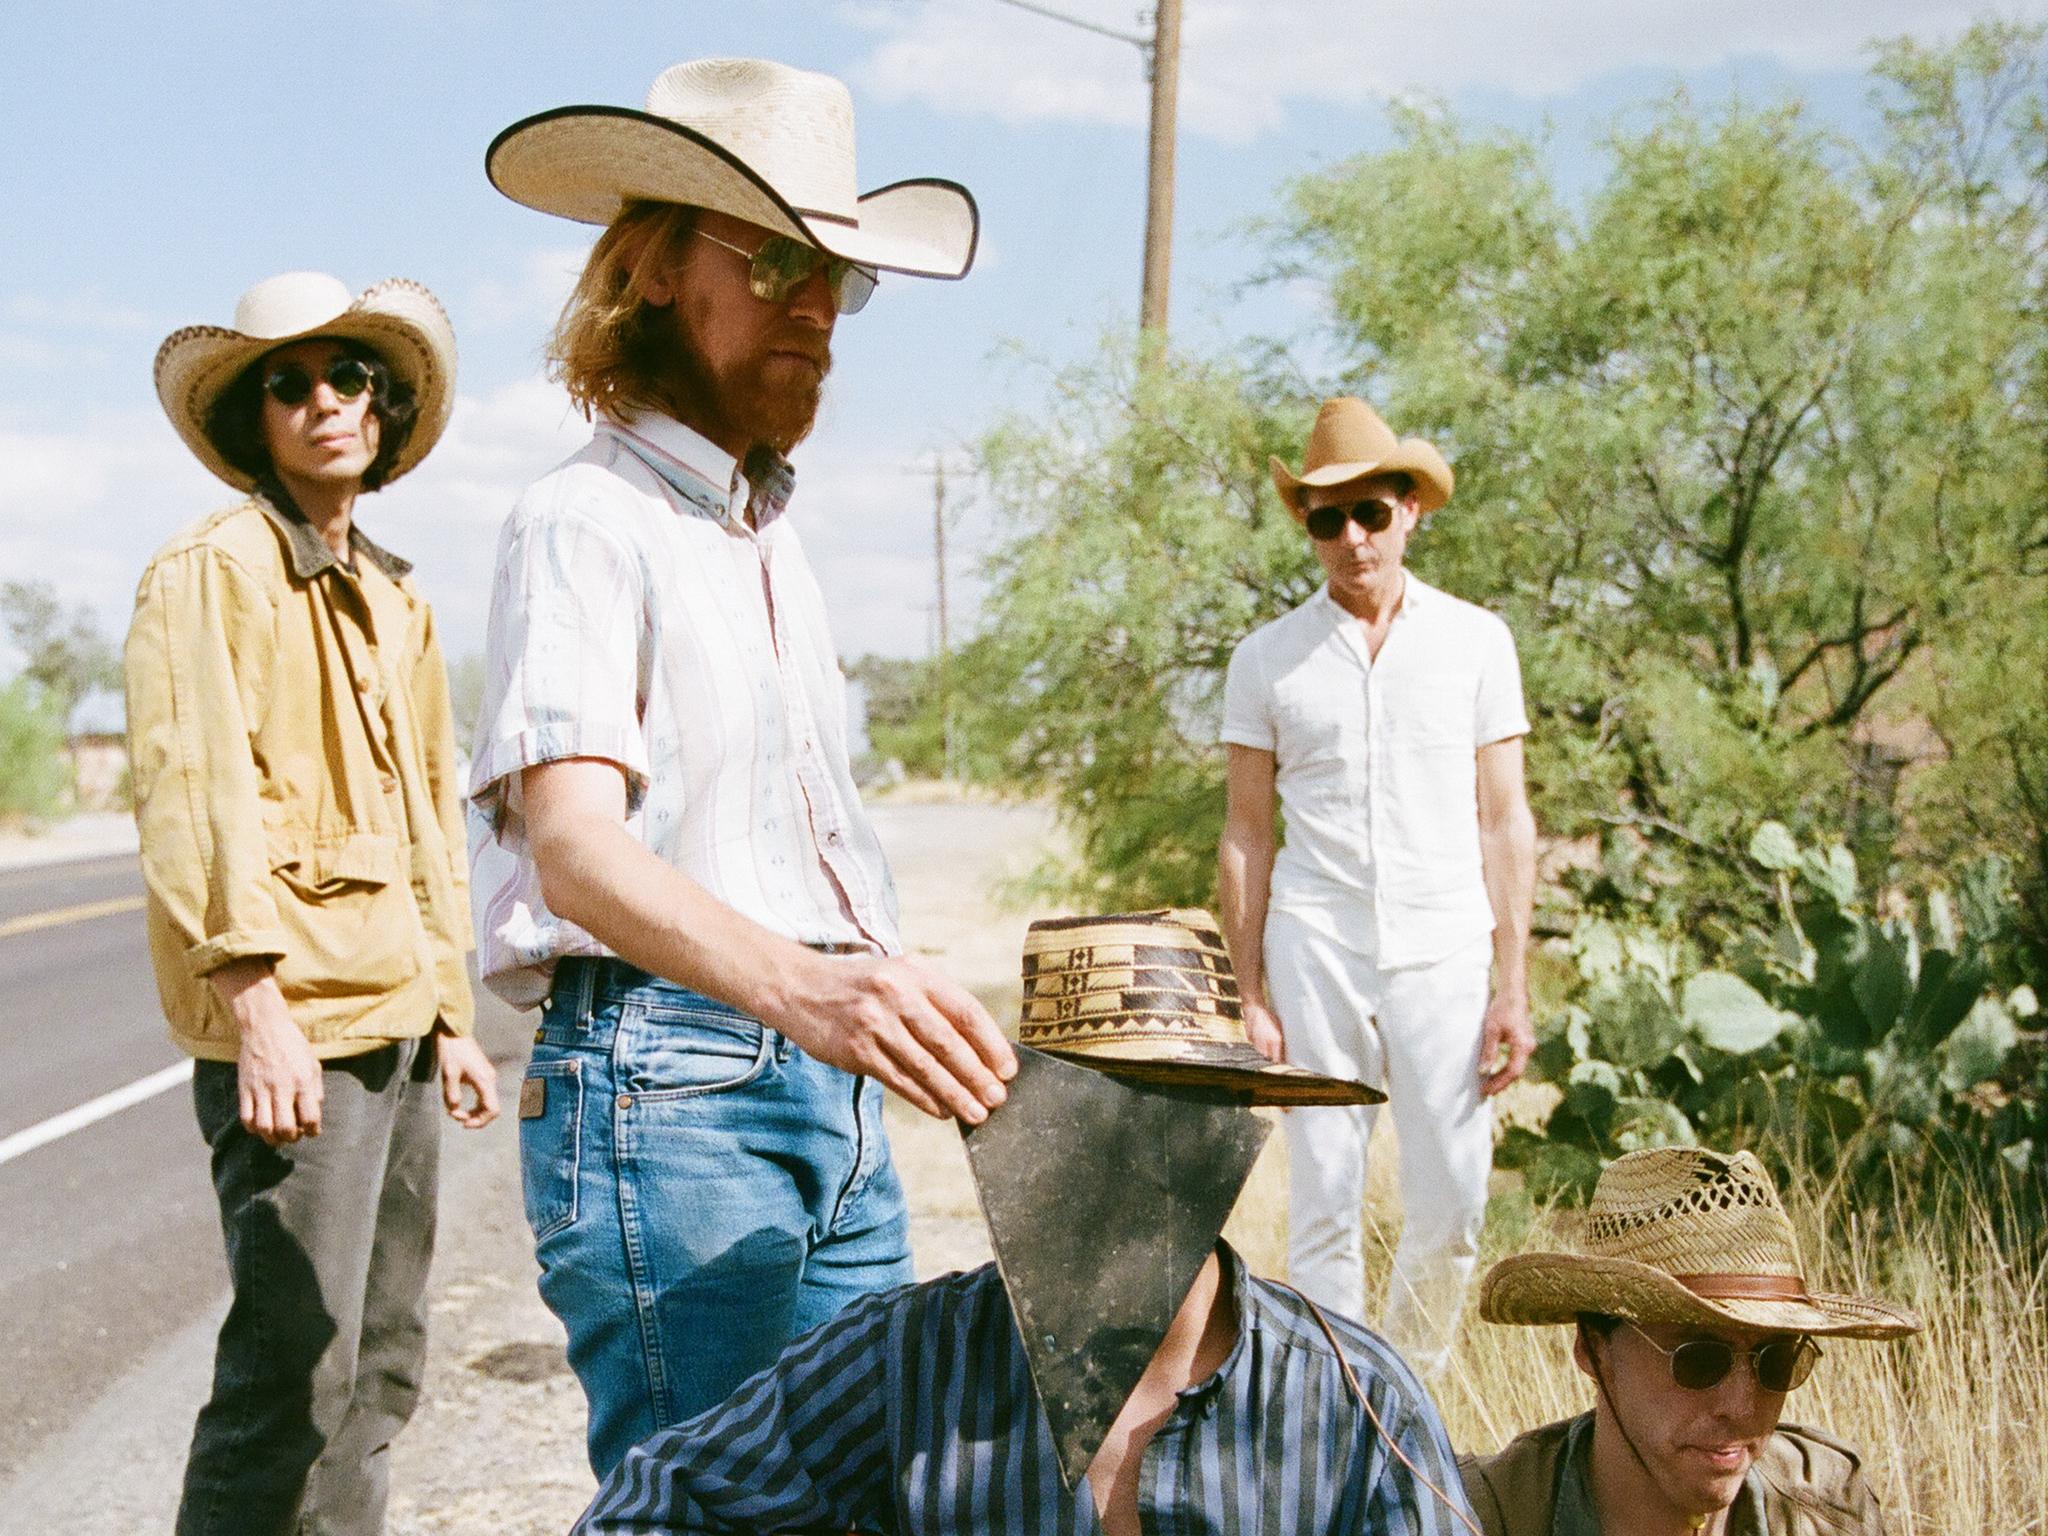 Deerhunter – Why Hasn't Everything Already Disappeared?